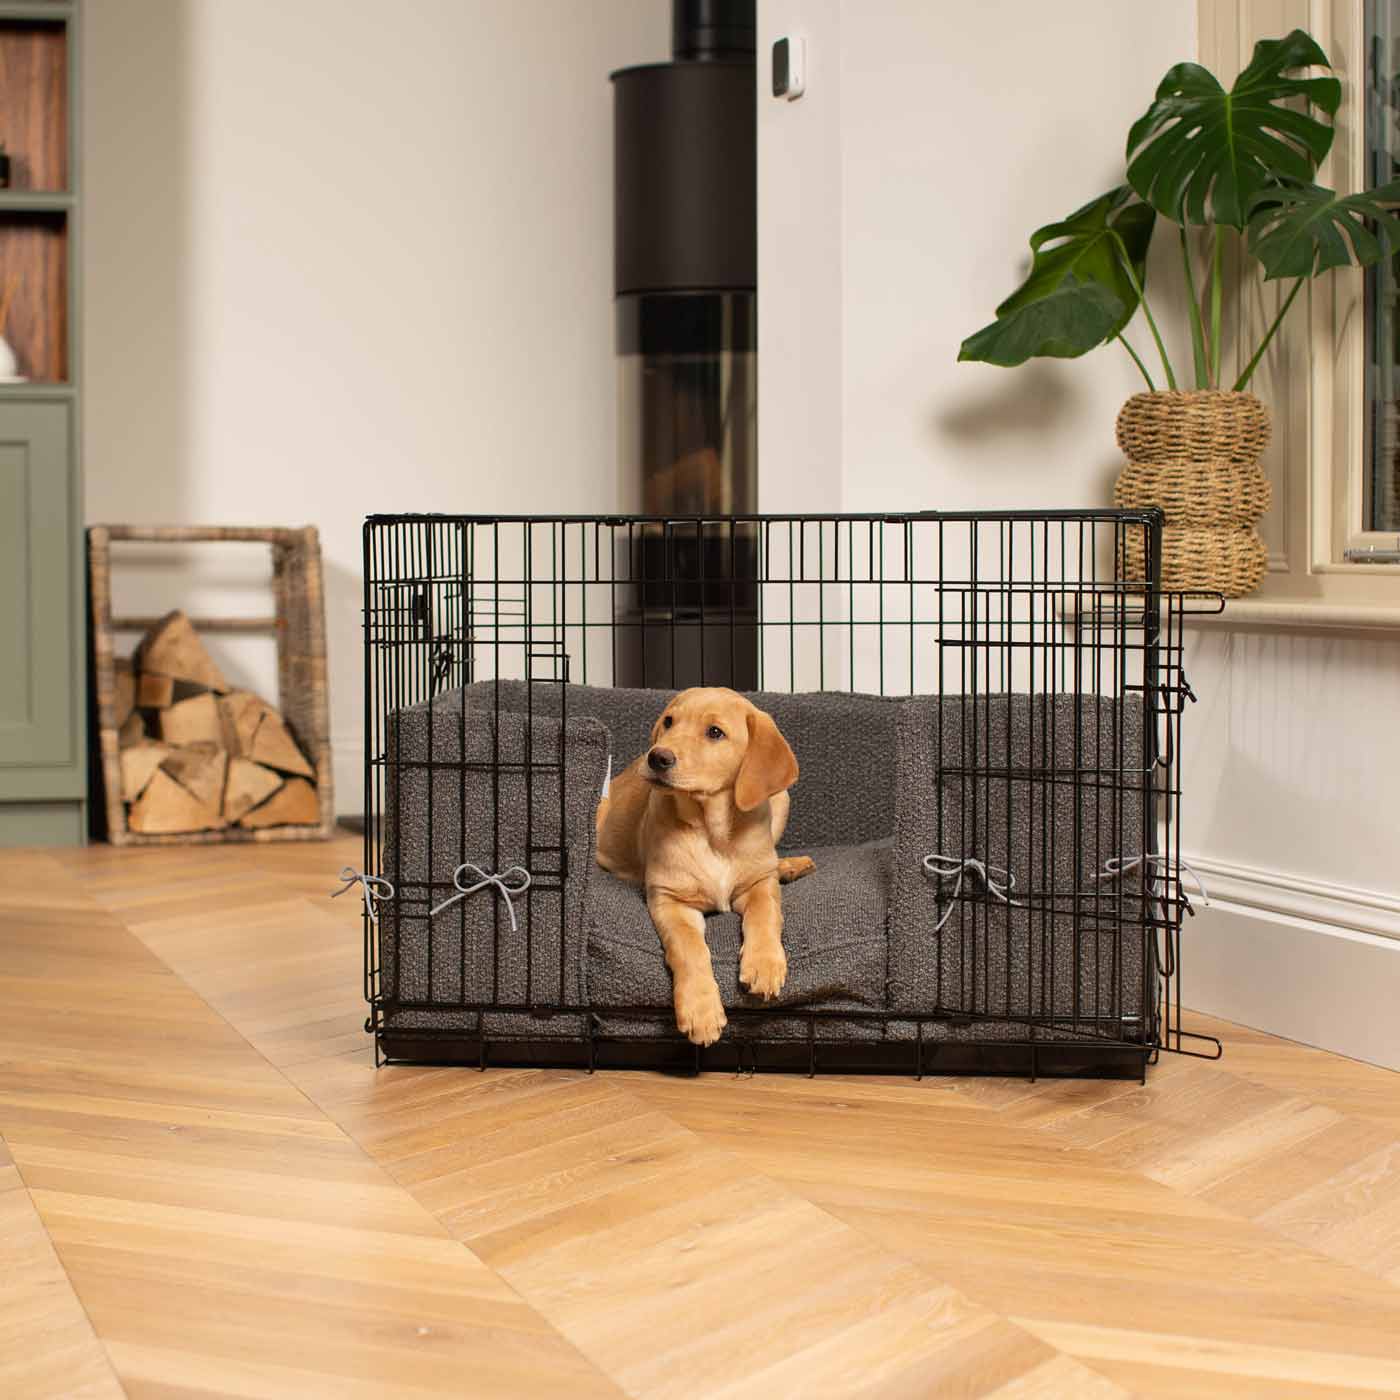 Luxury Dog Cage Bumper, Granite Bouclé Cage Bumper Cover The Perfect Dog Cage Accessory, Available To Personalize Now at Lords & Labradors US